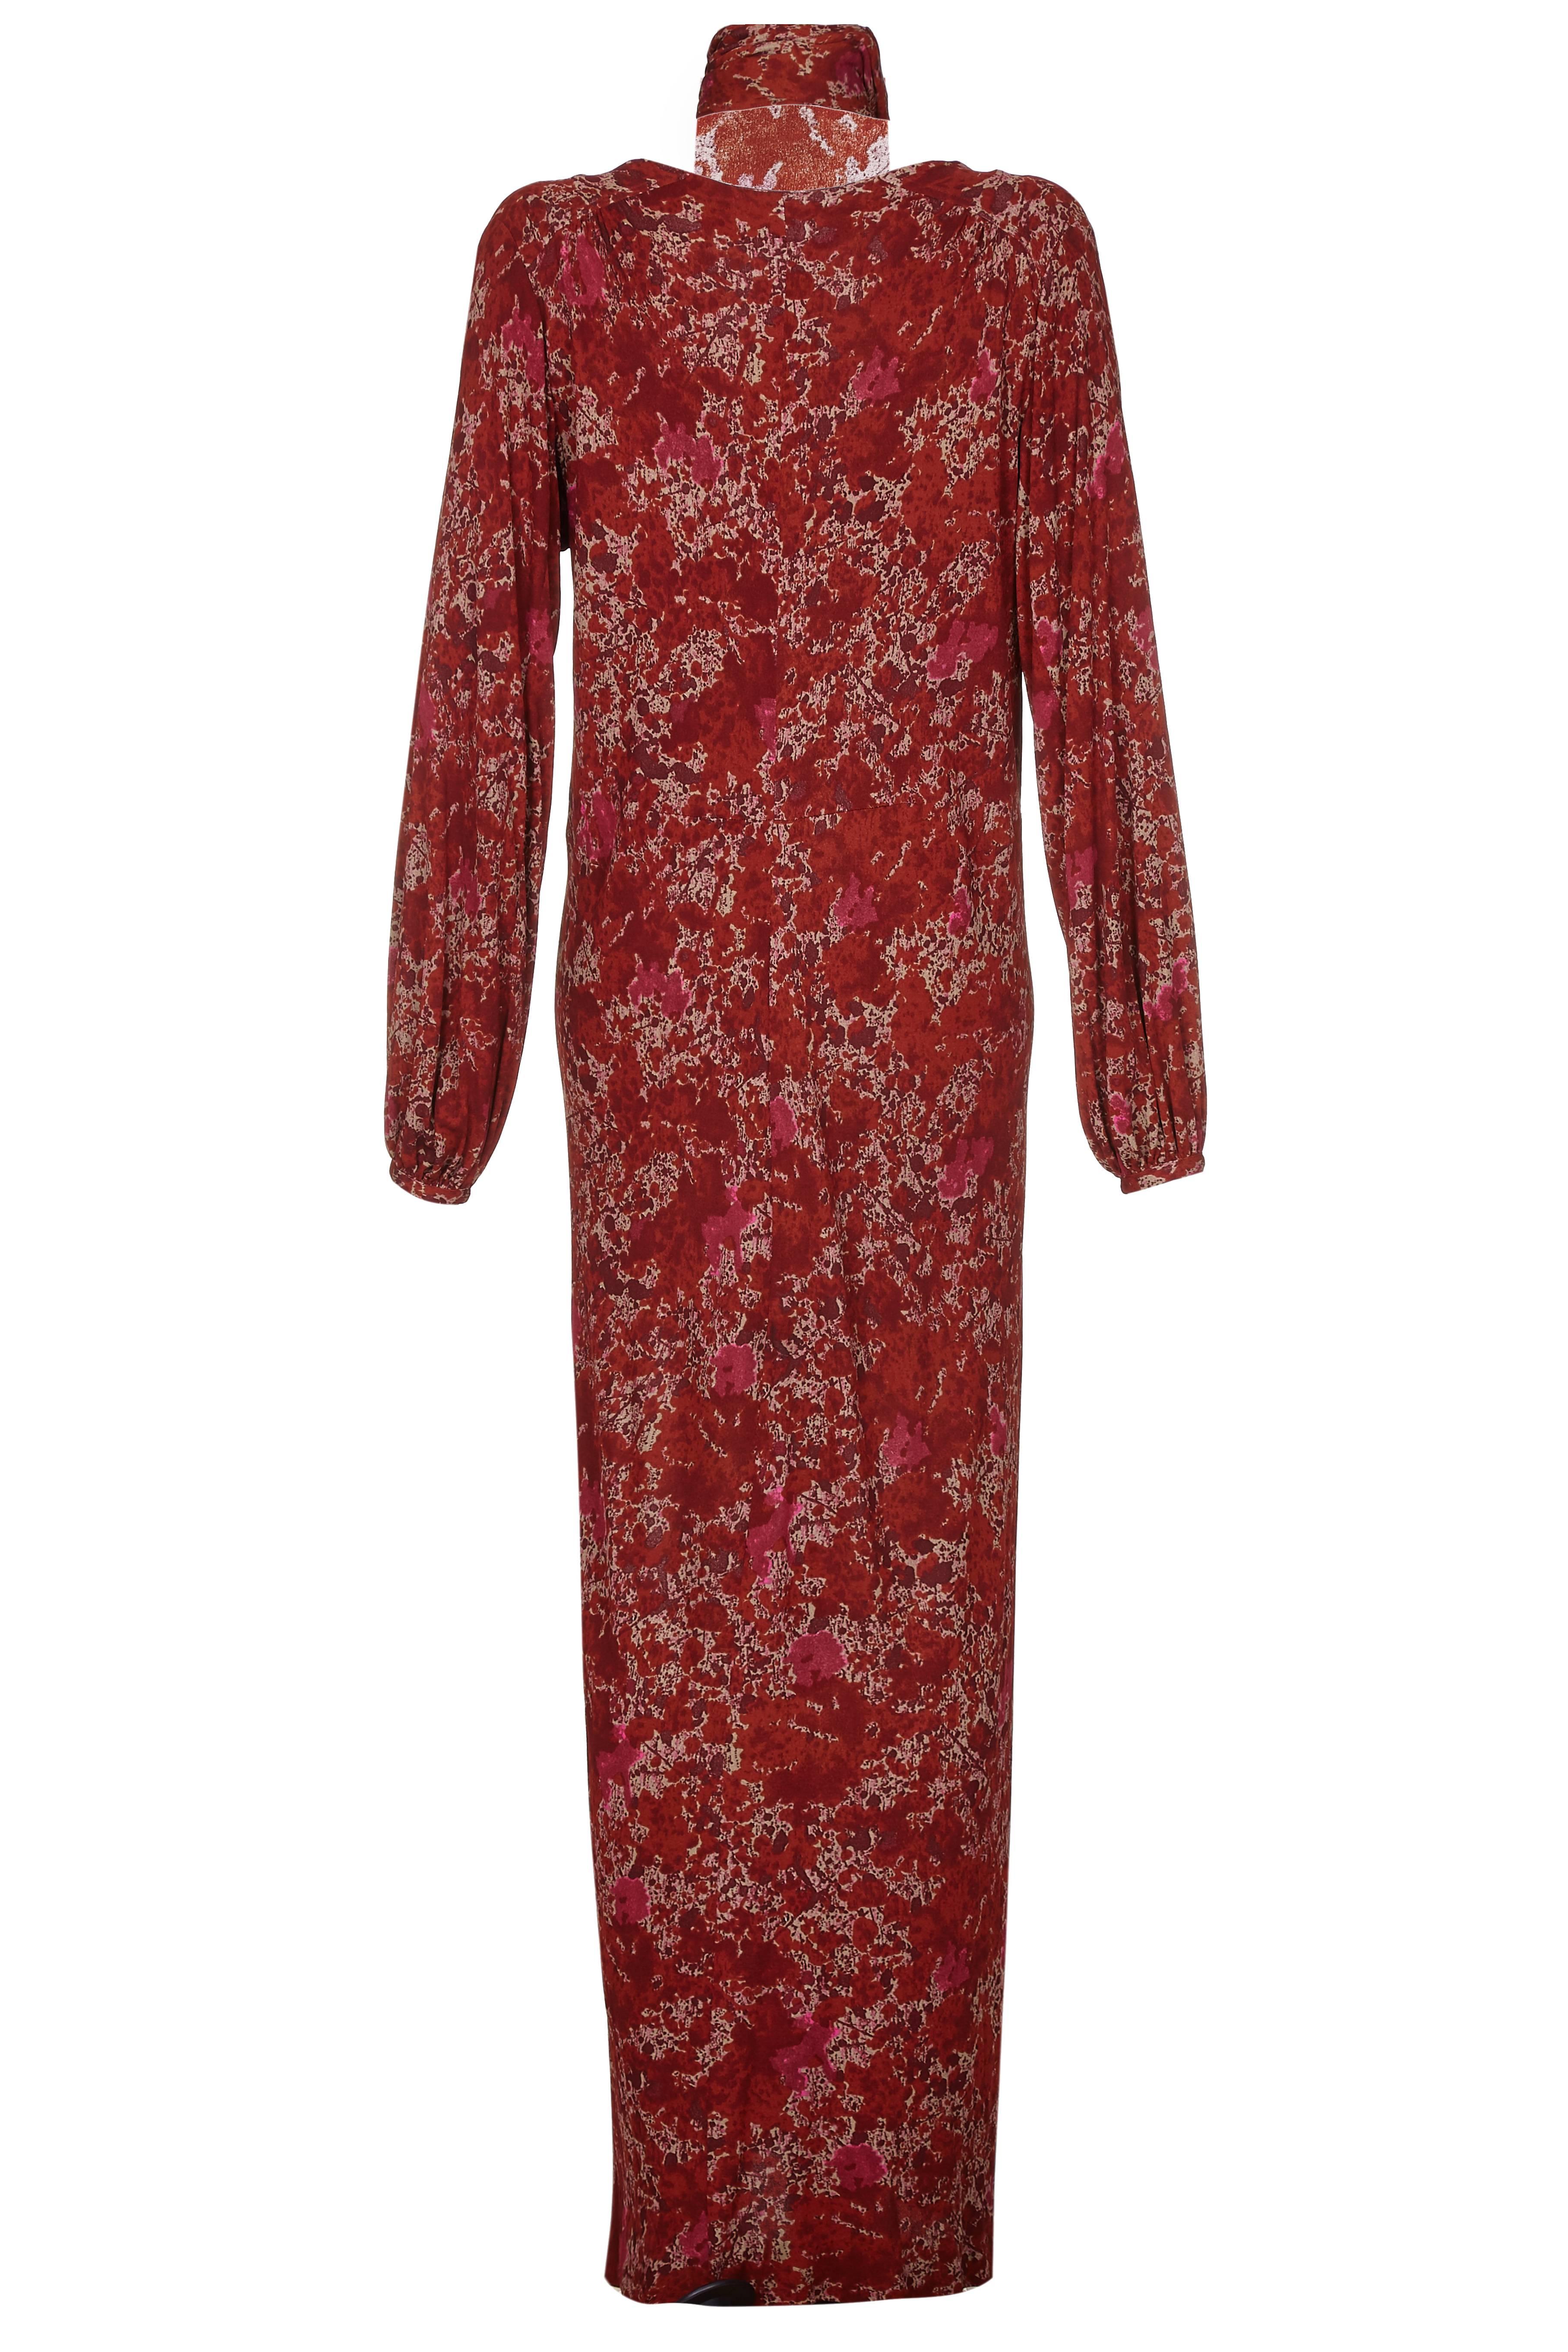 This gorgeous 1970s silk jersey maxi dress by Givenchy has long blouson sleeves which fasten at the wrist. The medium weight silk fabric hangs beautifully from a deep v neck which has hook and eye fastenings, giving the freedom to adjust the depth